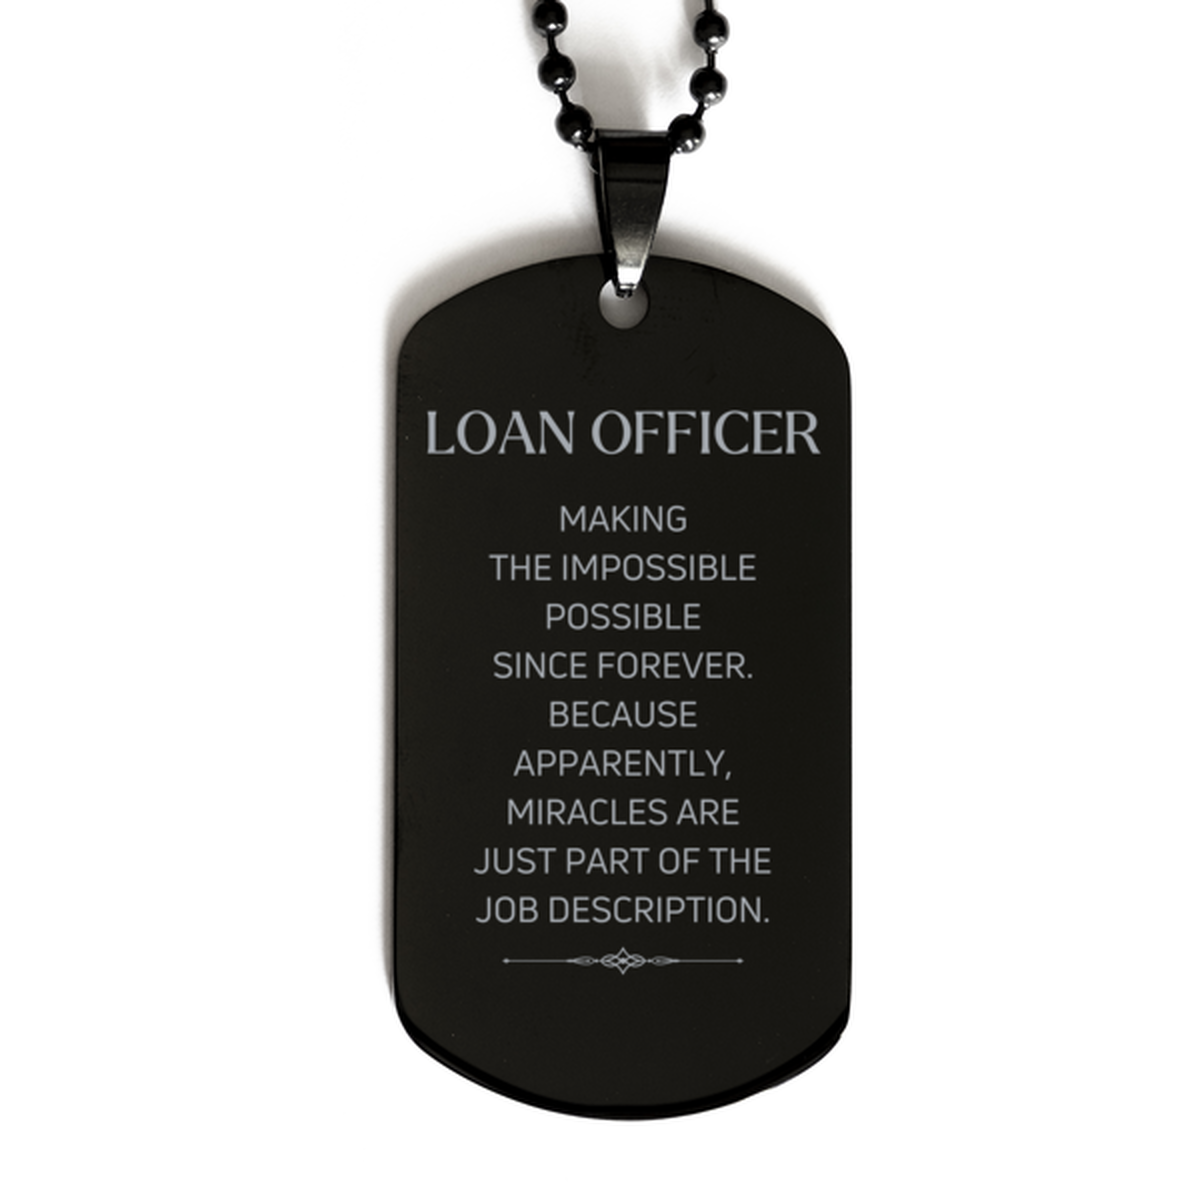 Funny Loan Officer Gifts, Miracles are just part of the job description, Inspirational Birthday Black Dog Tag For Loan Officer, Men, Women, Coworkers, Friends, Boss